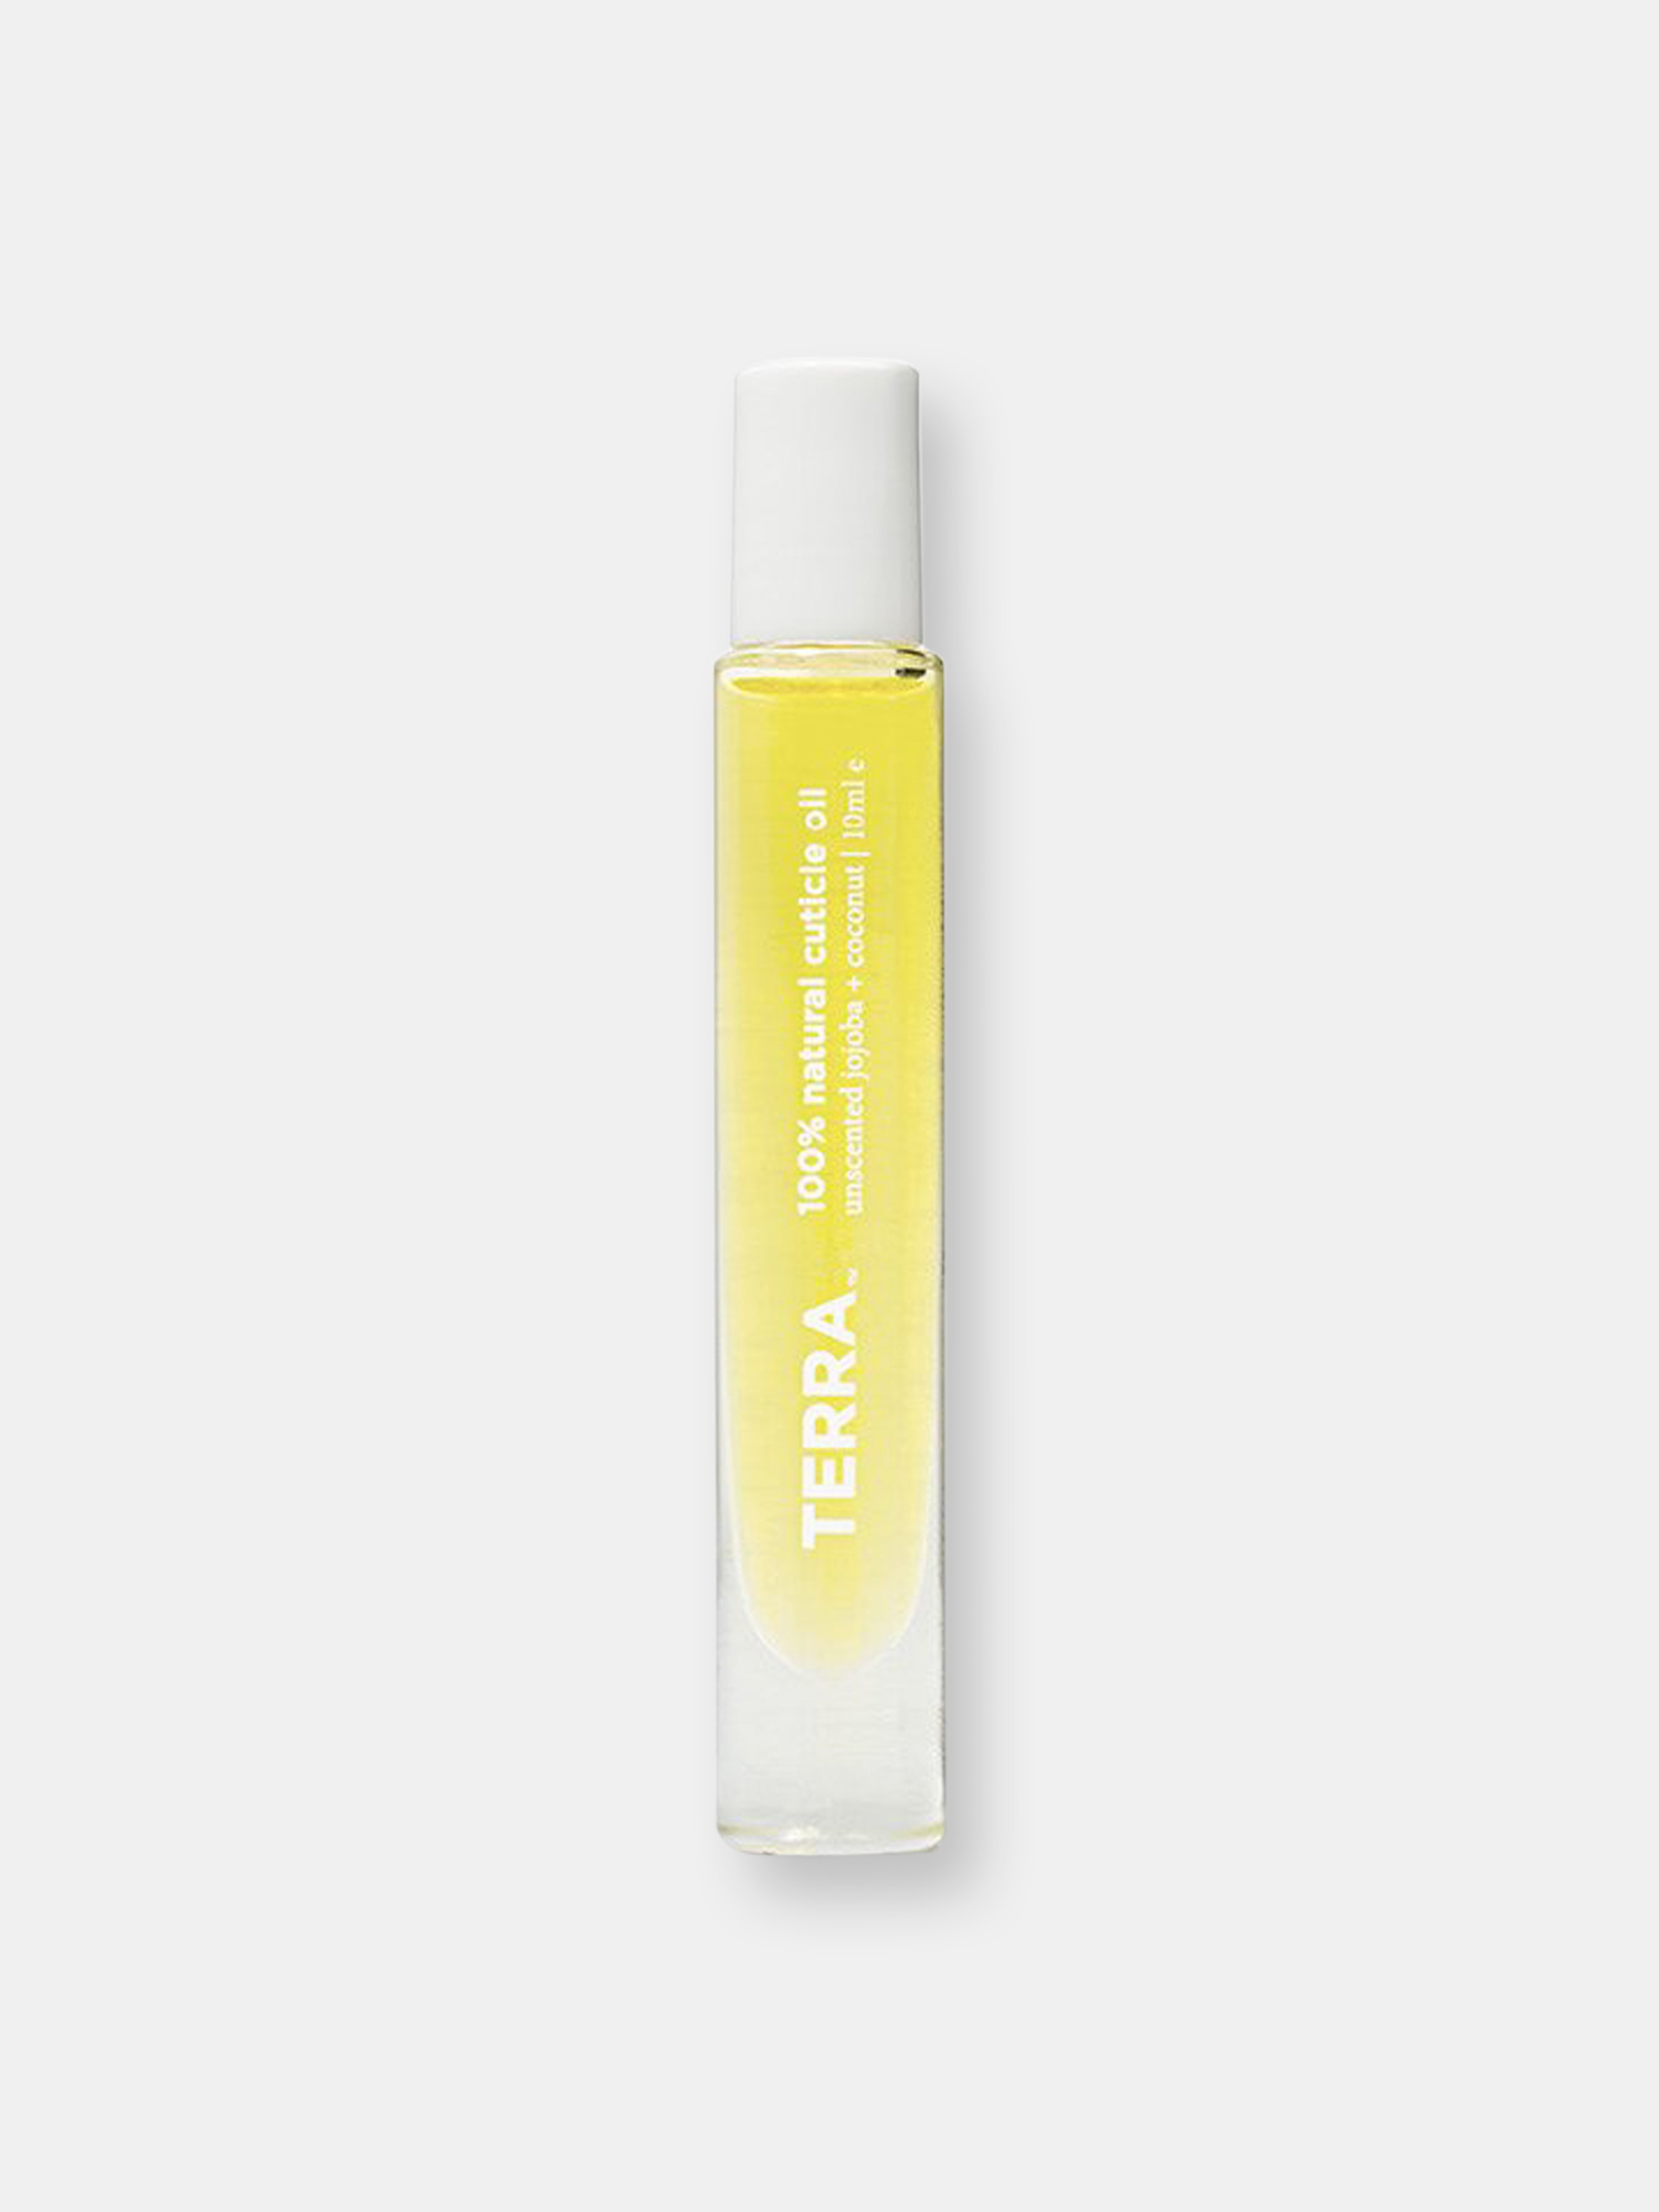 Terra Beauty Products Unscented Natural Cuticle Oil With Jojoba & Coconut